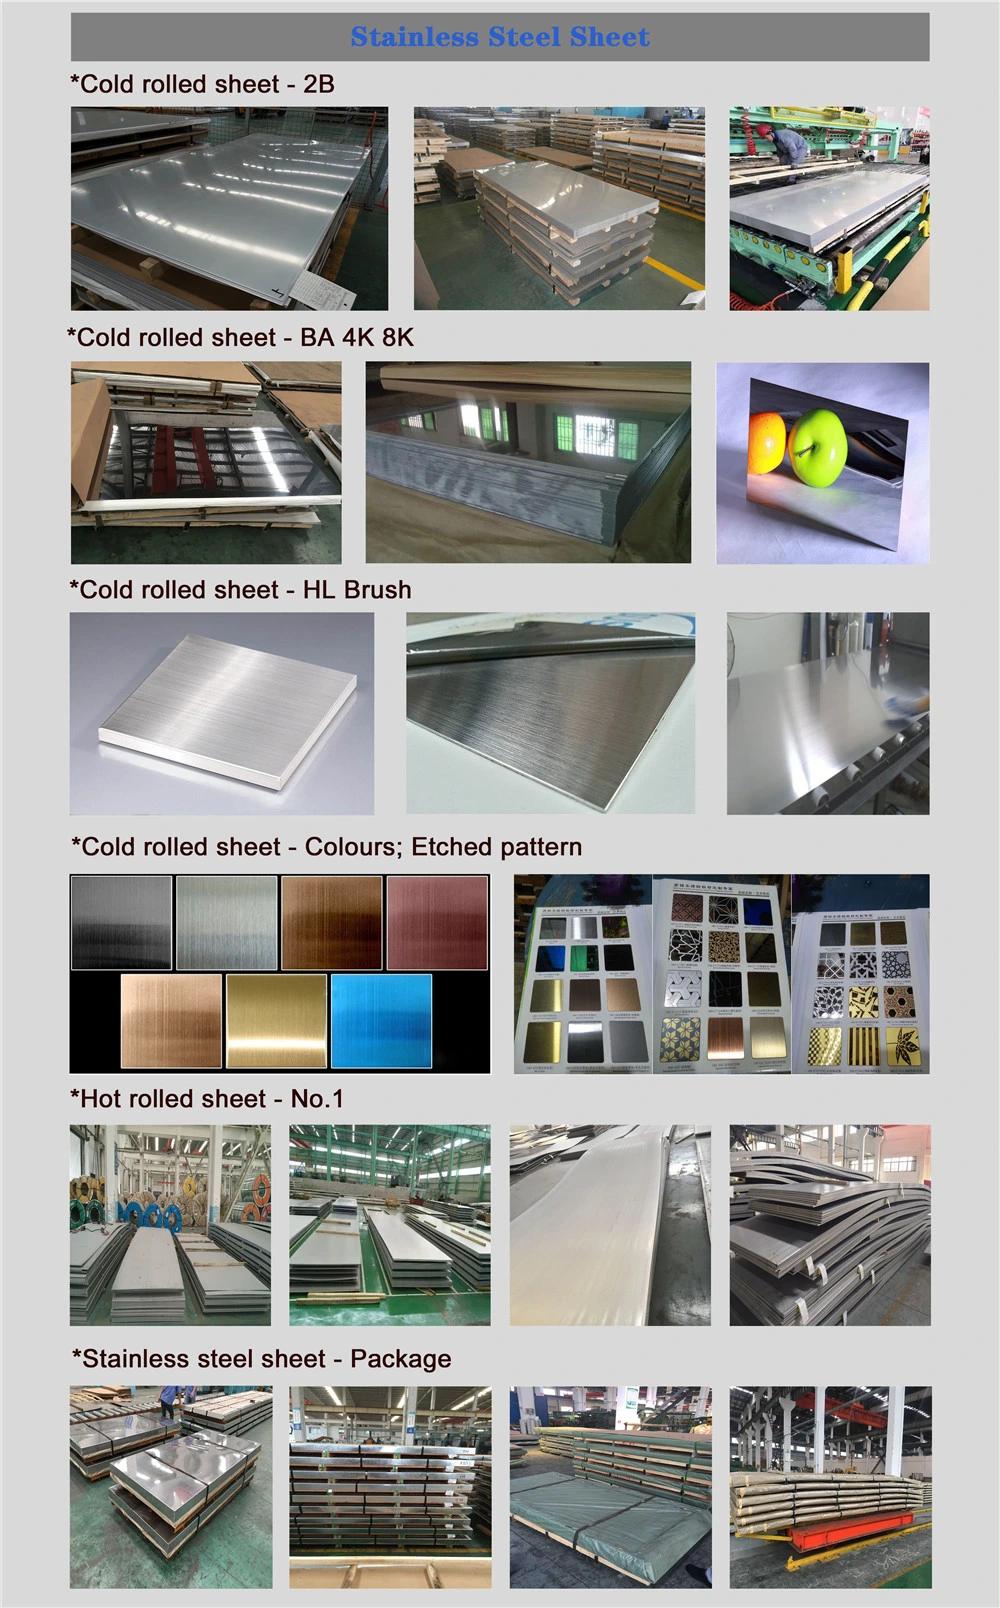 Martensitic 304, 304L, 316, 316L, 310S, 316ti. 630/1.4542 Stainless Steel 17-4pH/0Cr17Ni4Cu4Nb Plate/Sheet Price Cold Rolled Stainless Steel Sheet